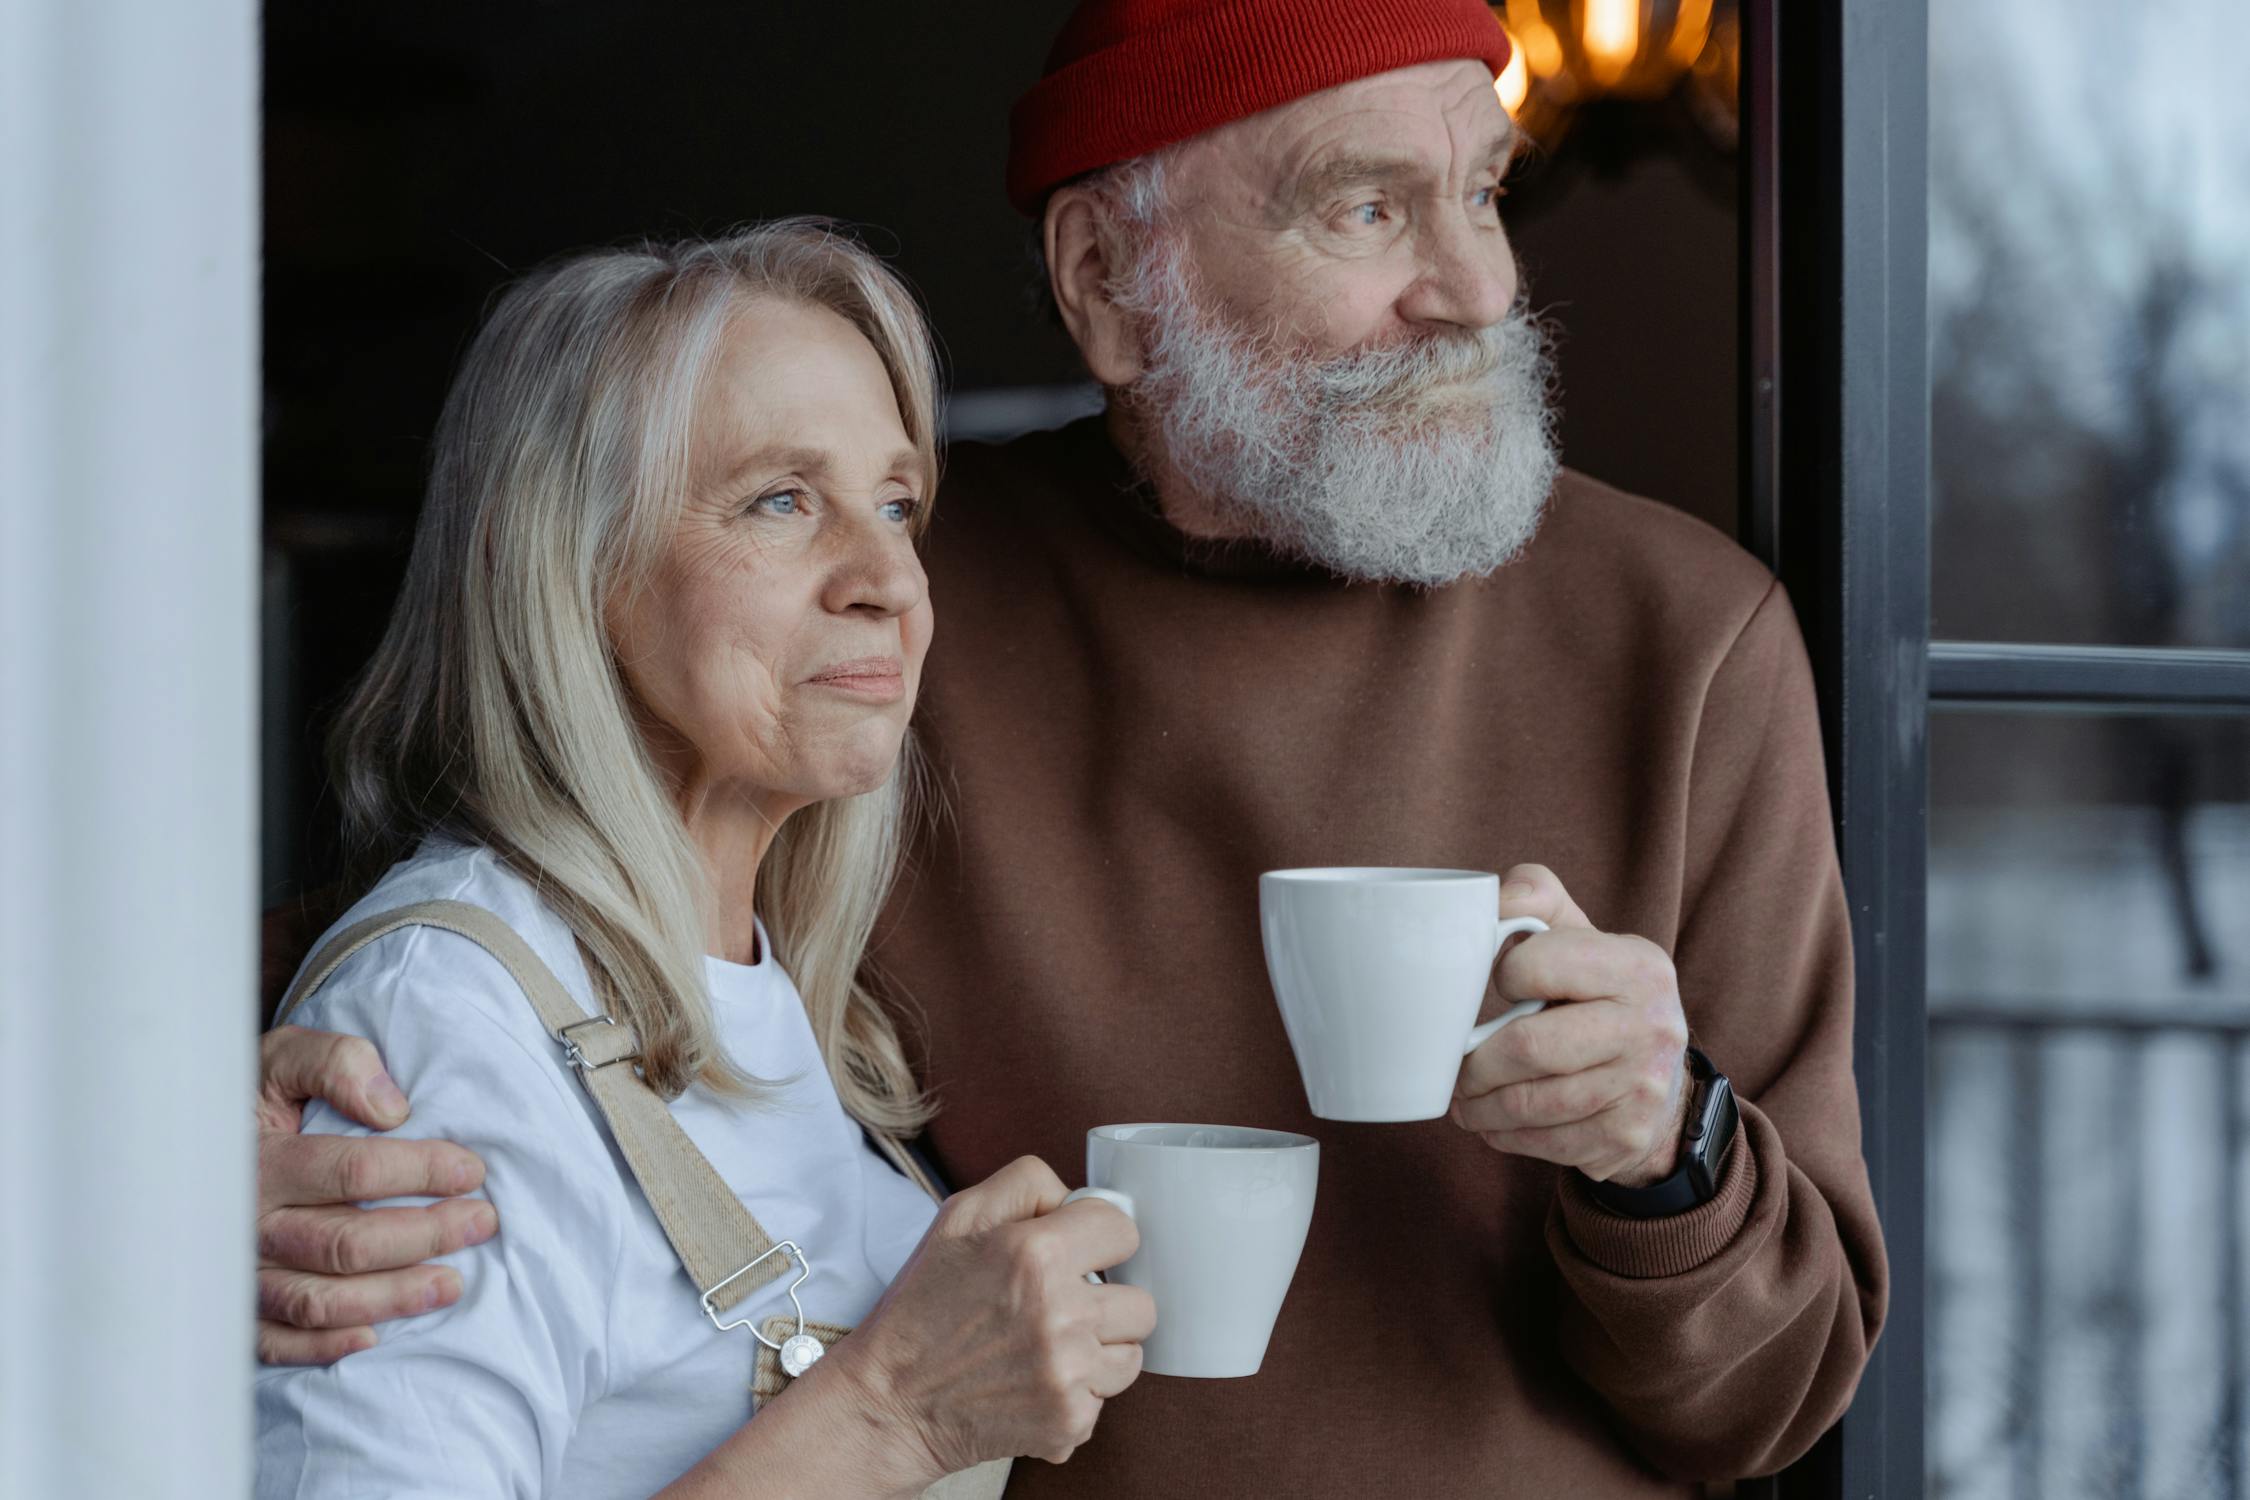 Senior Citizens. old couple Photo by MART PRODUCTION from Pexels: https://www.pexels.com/photo/man-and-woman-holding-white-ceramic-mugs-7330130/